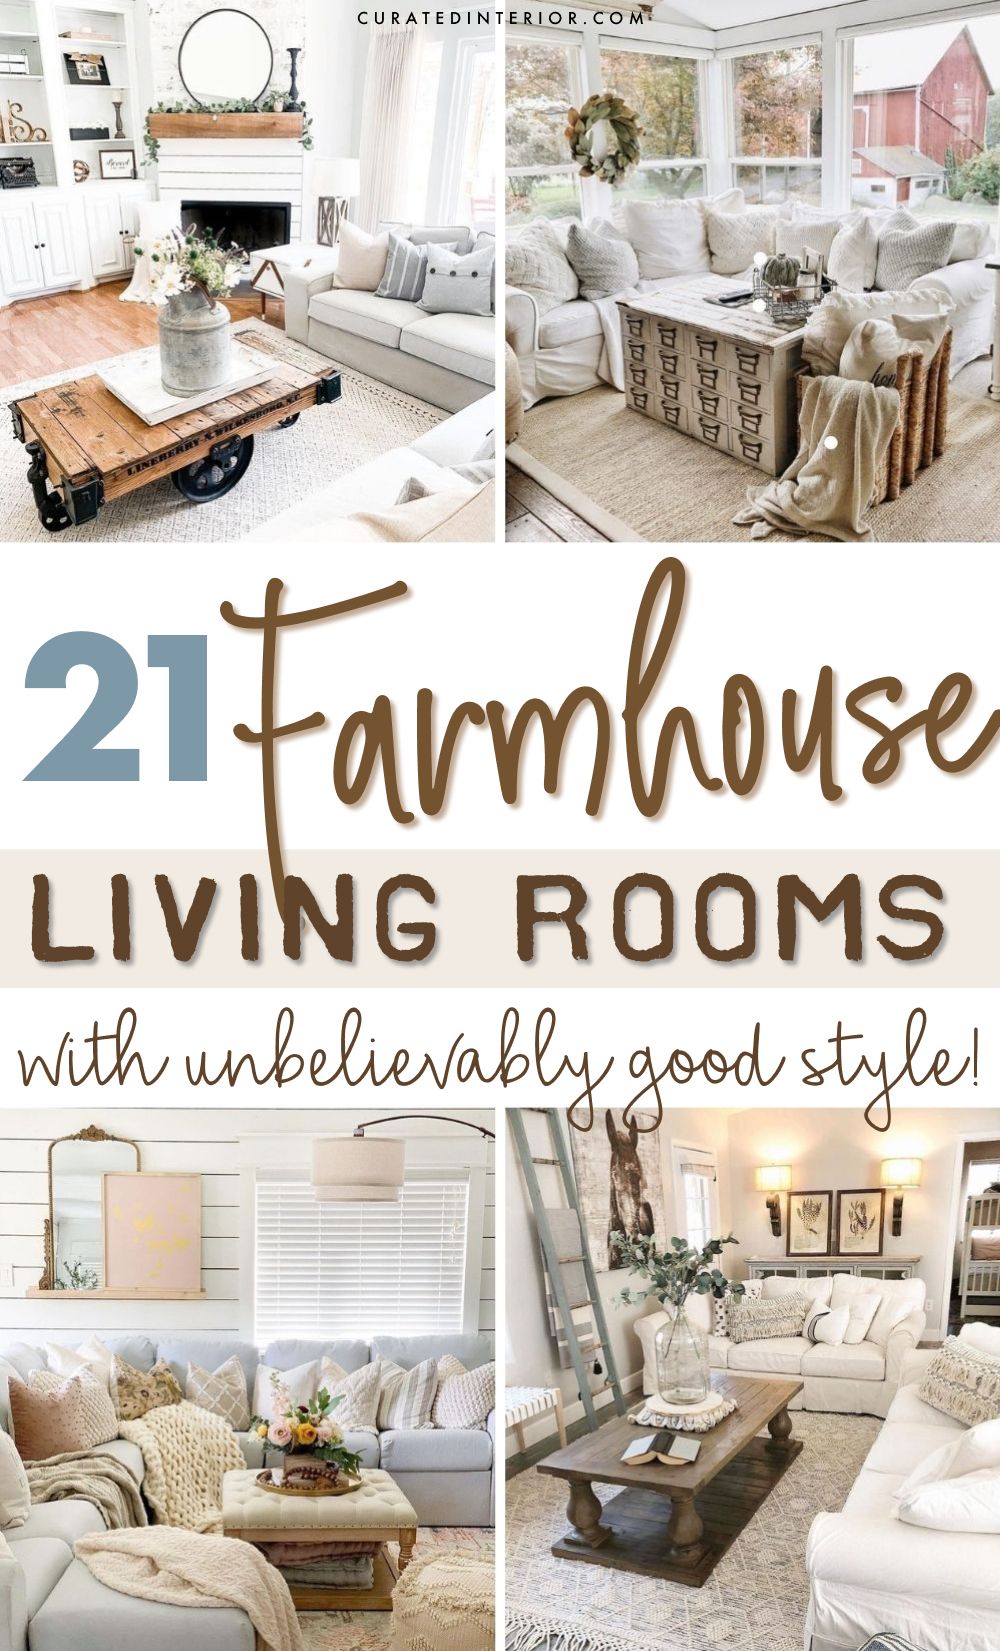 21 Quintessential Farmhouse Living Rooms with Good Style